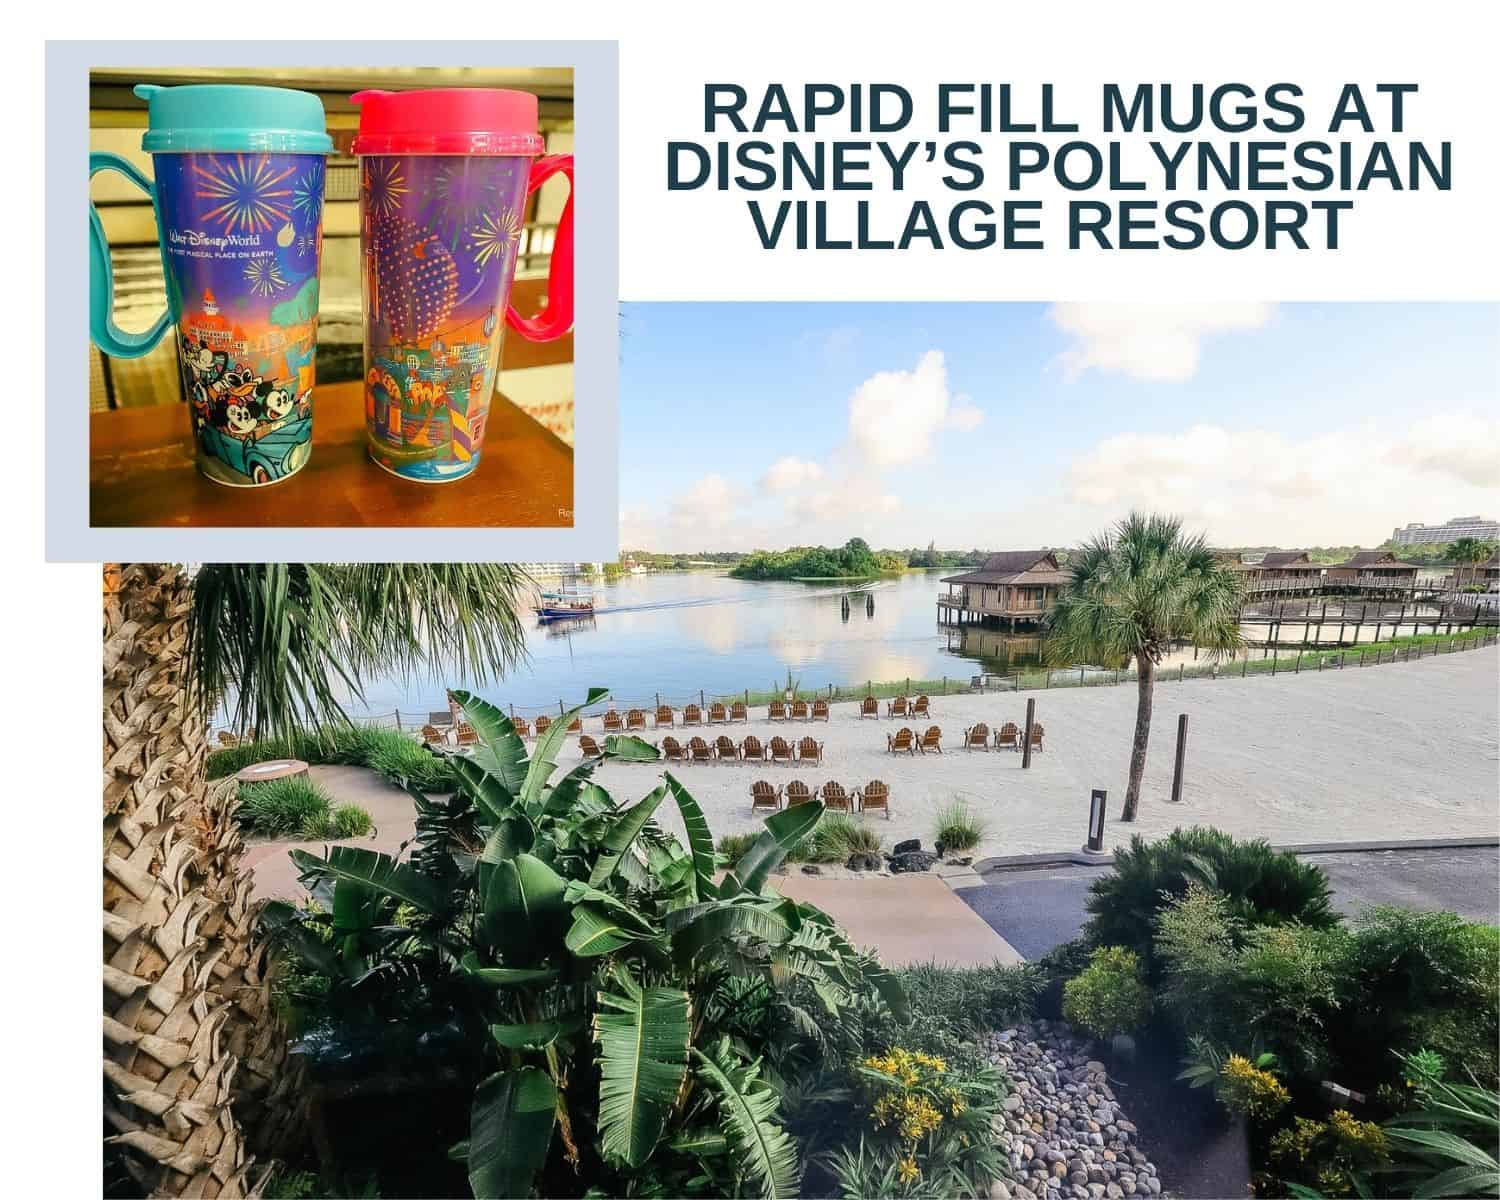 The 2 Places to Refill Rapid Fill Mugs at Disney’s Polynesian Village Resort